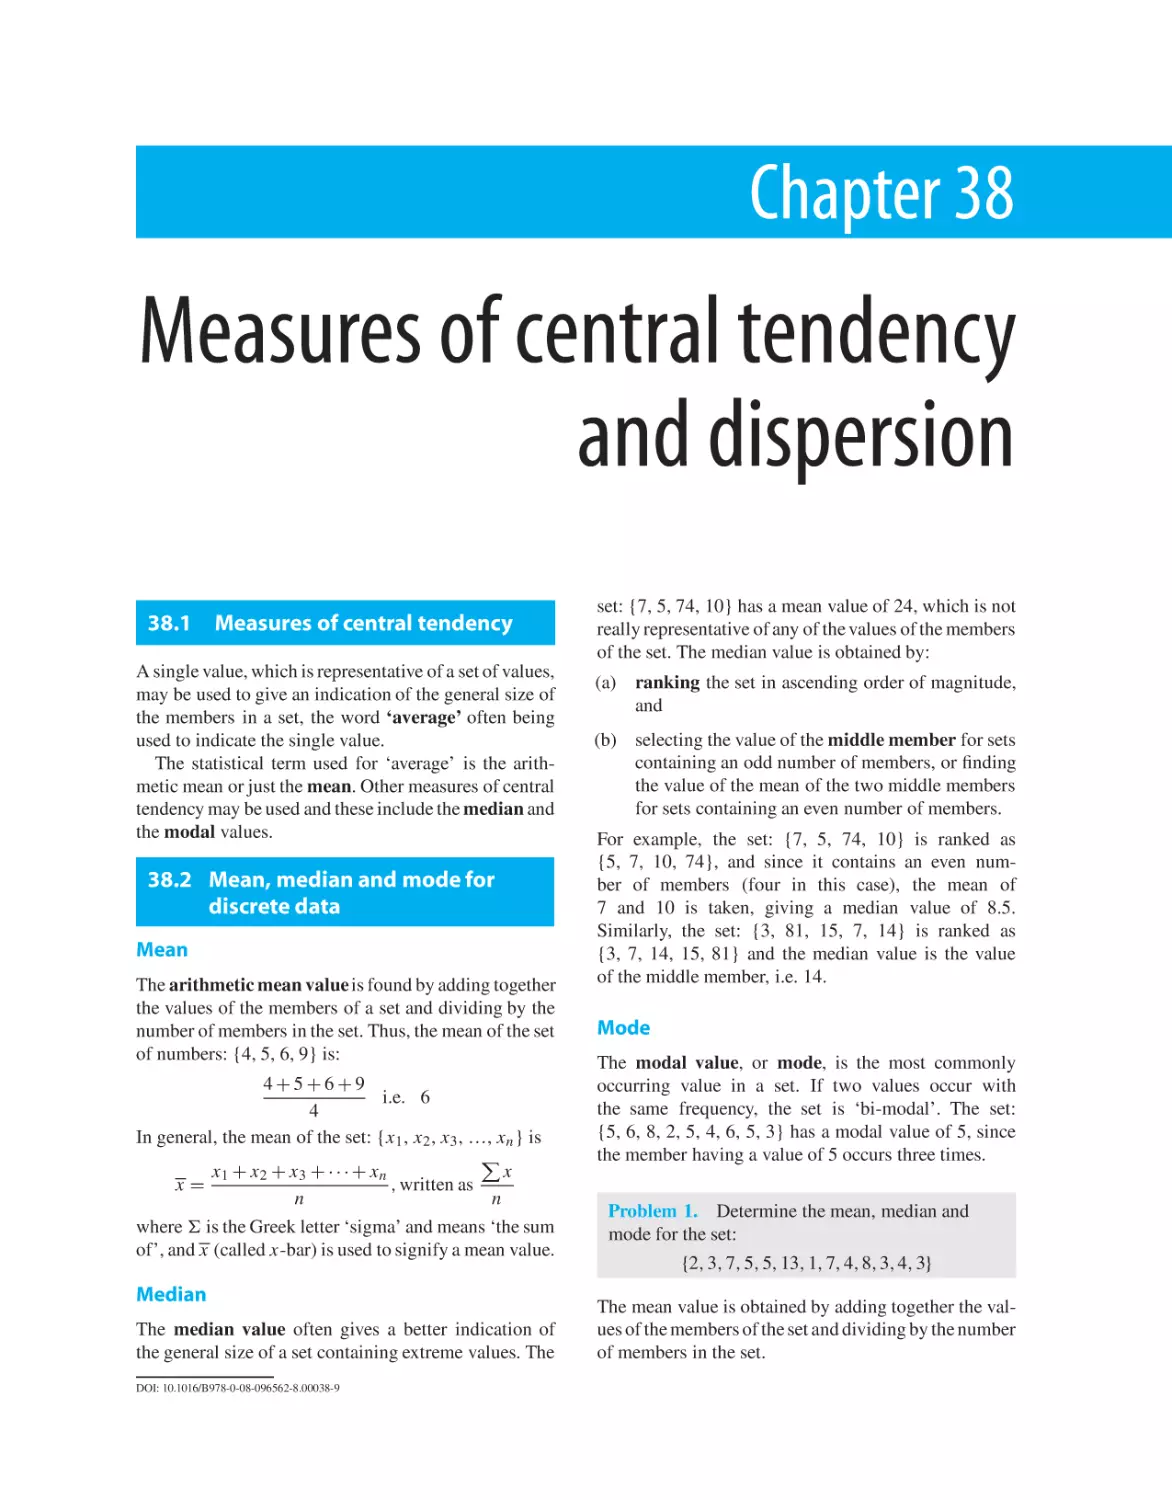 Chapter 38. Measures of central tendency and dispersion
38.1 Measures of central tendency
38.2 Mean, median and mode for discrete data